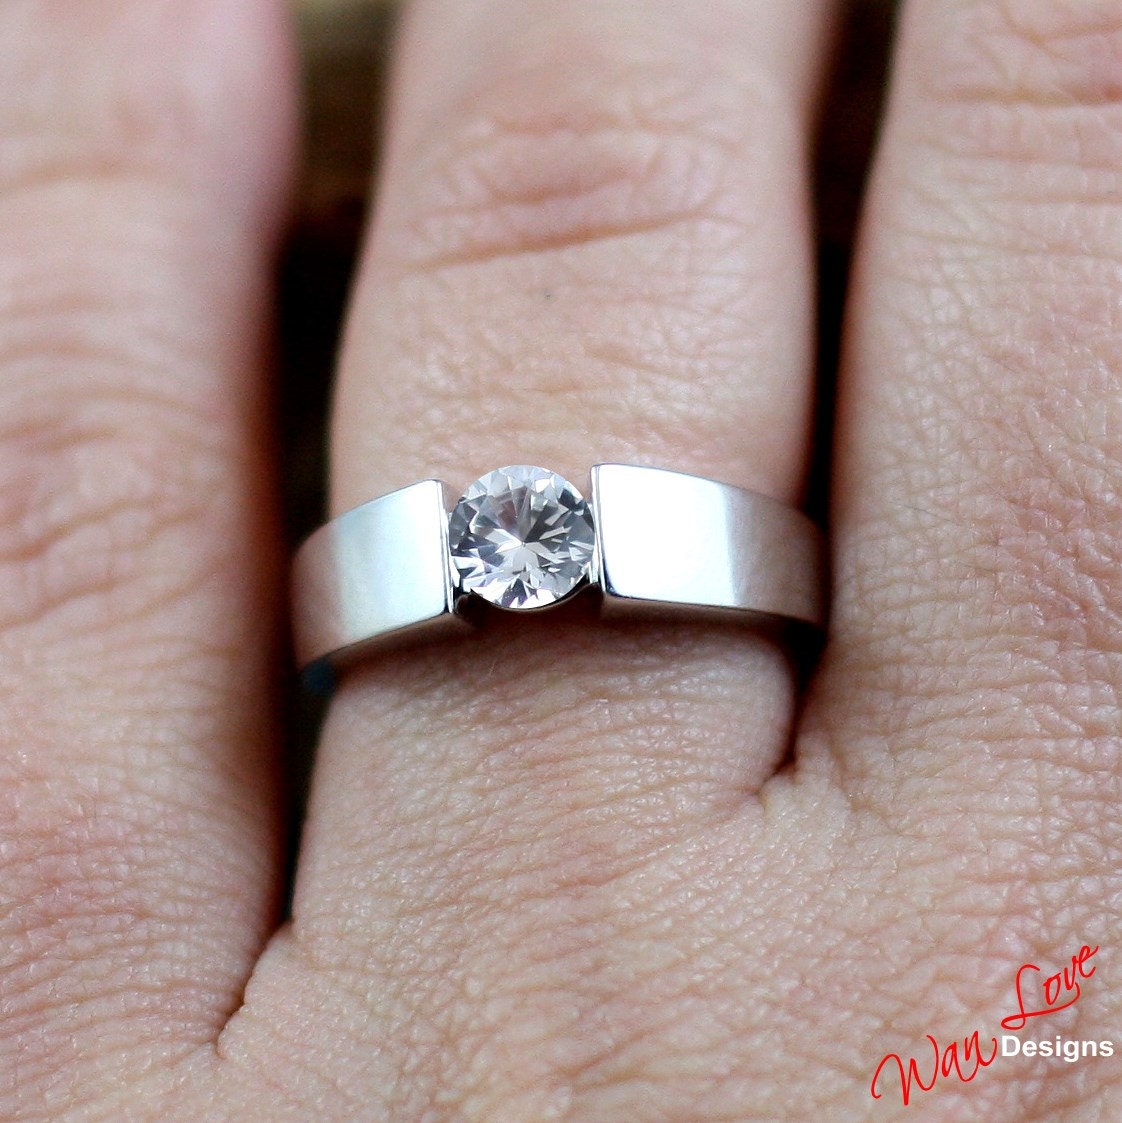 Sample Sale Ready to ship-White Sapphire Channel Tension set Engagement Ring, Solitaire, Thick band, 1ct, 6mm, Silver Rhodium Wan Love Designs